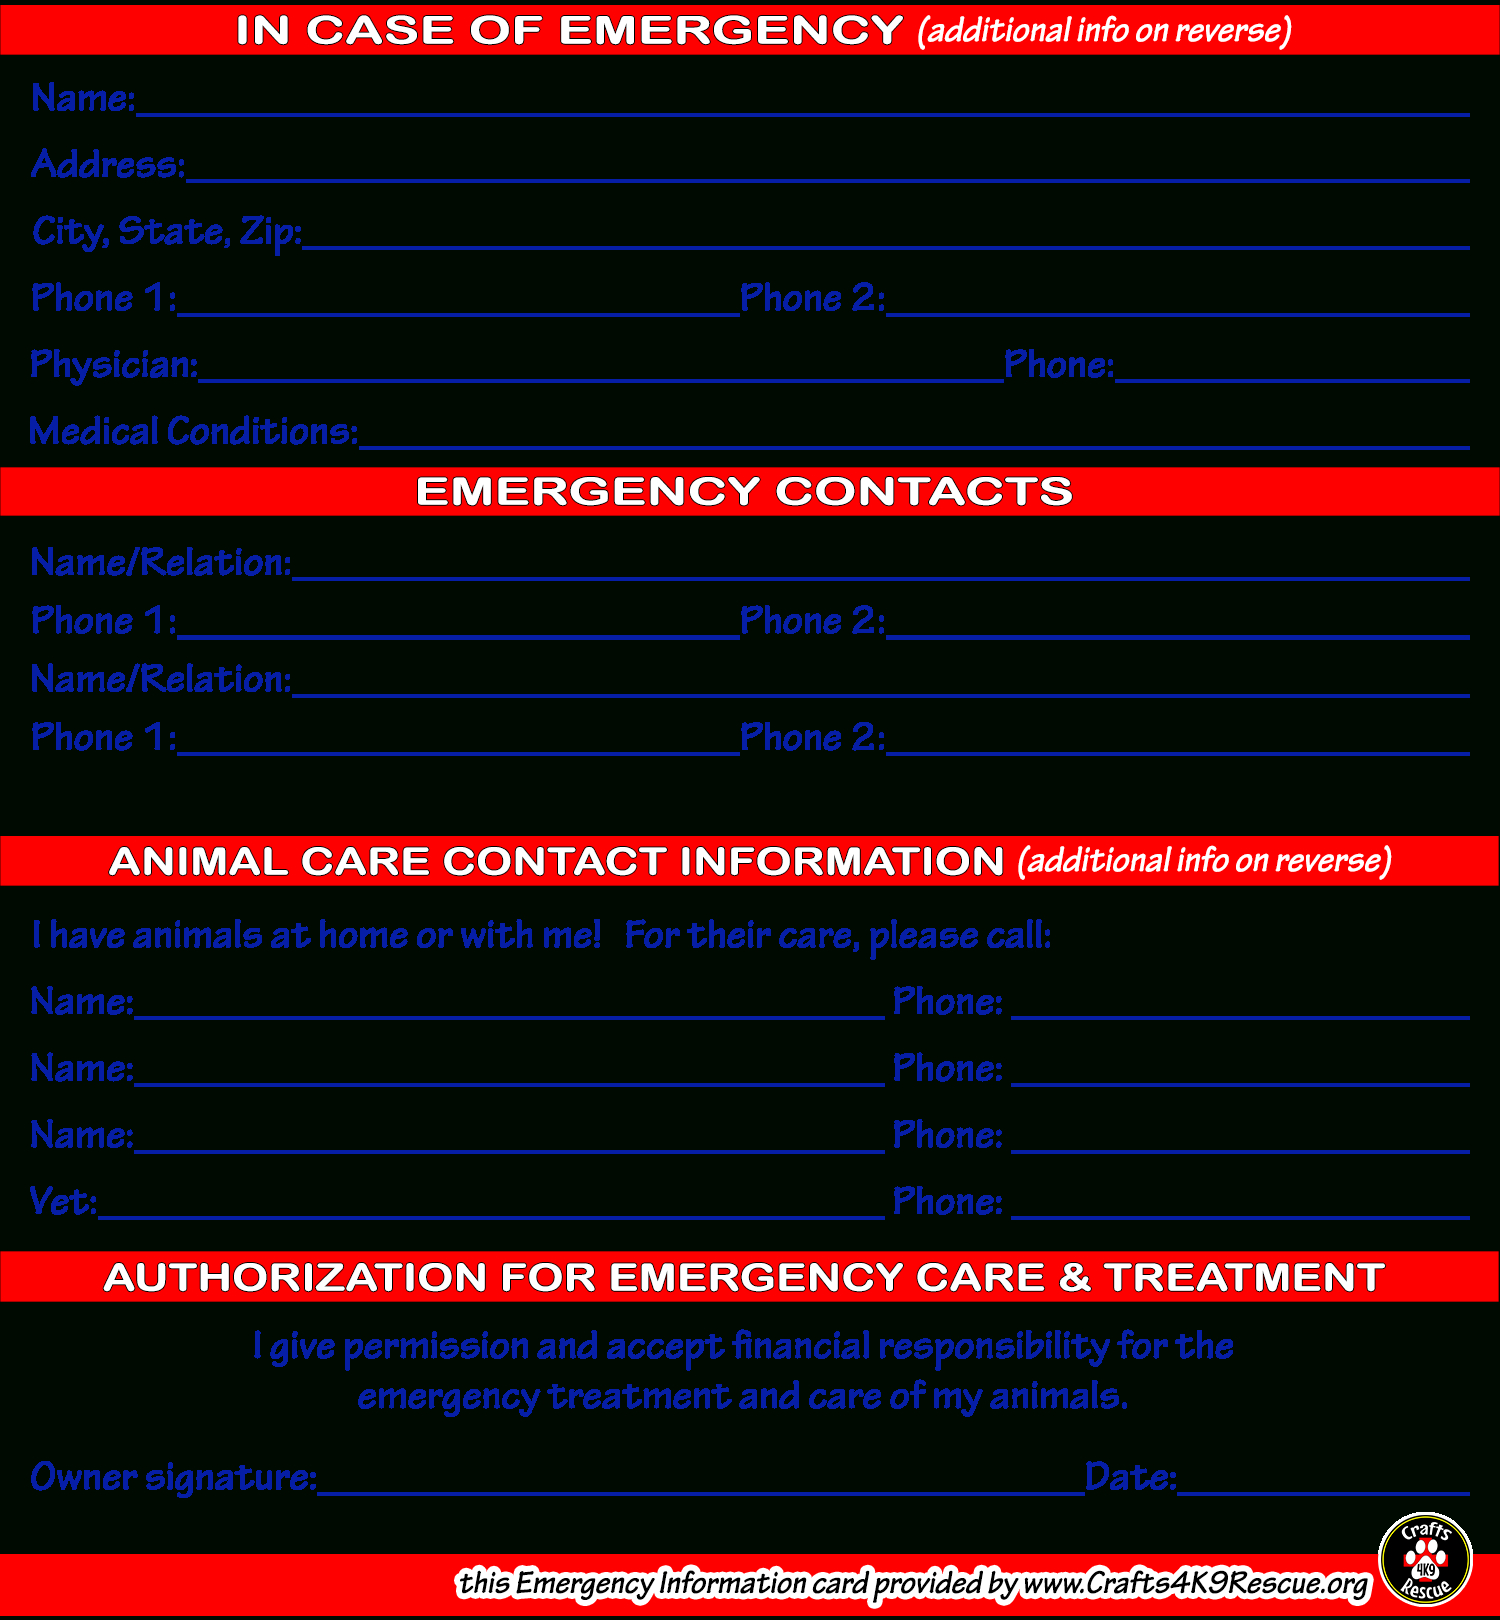 Emergency Information Card Template | Crafts4K9Rescue With Regard To In Case Of Emergency Card Template